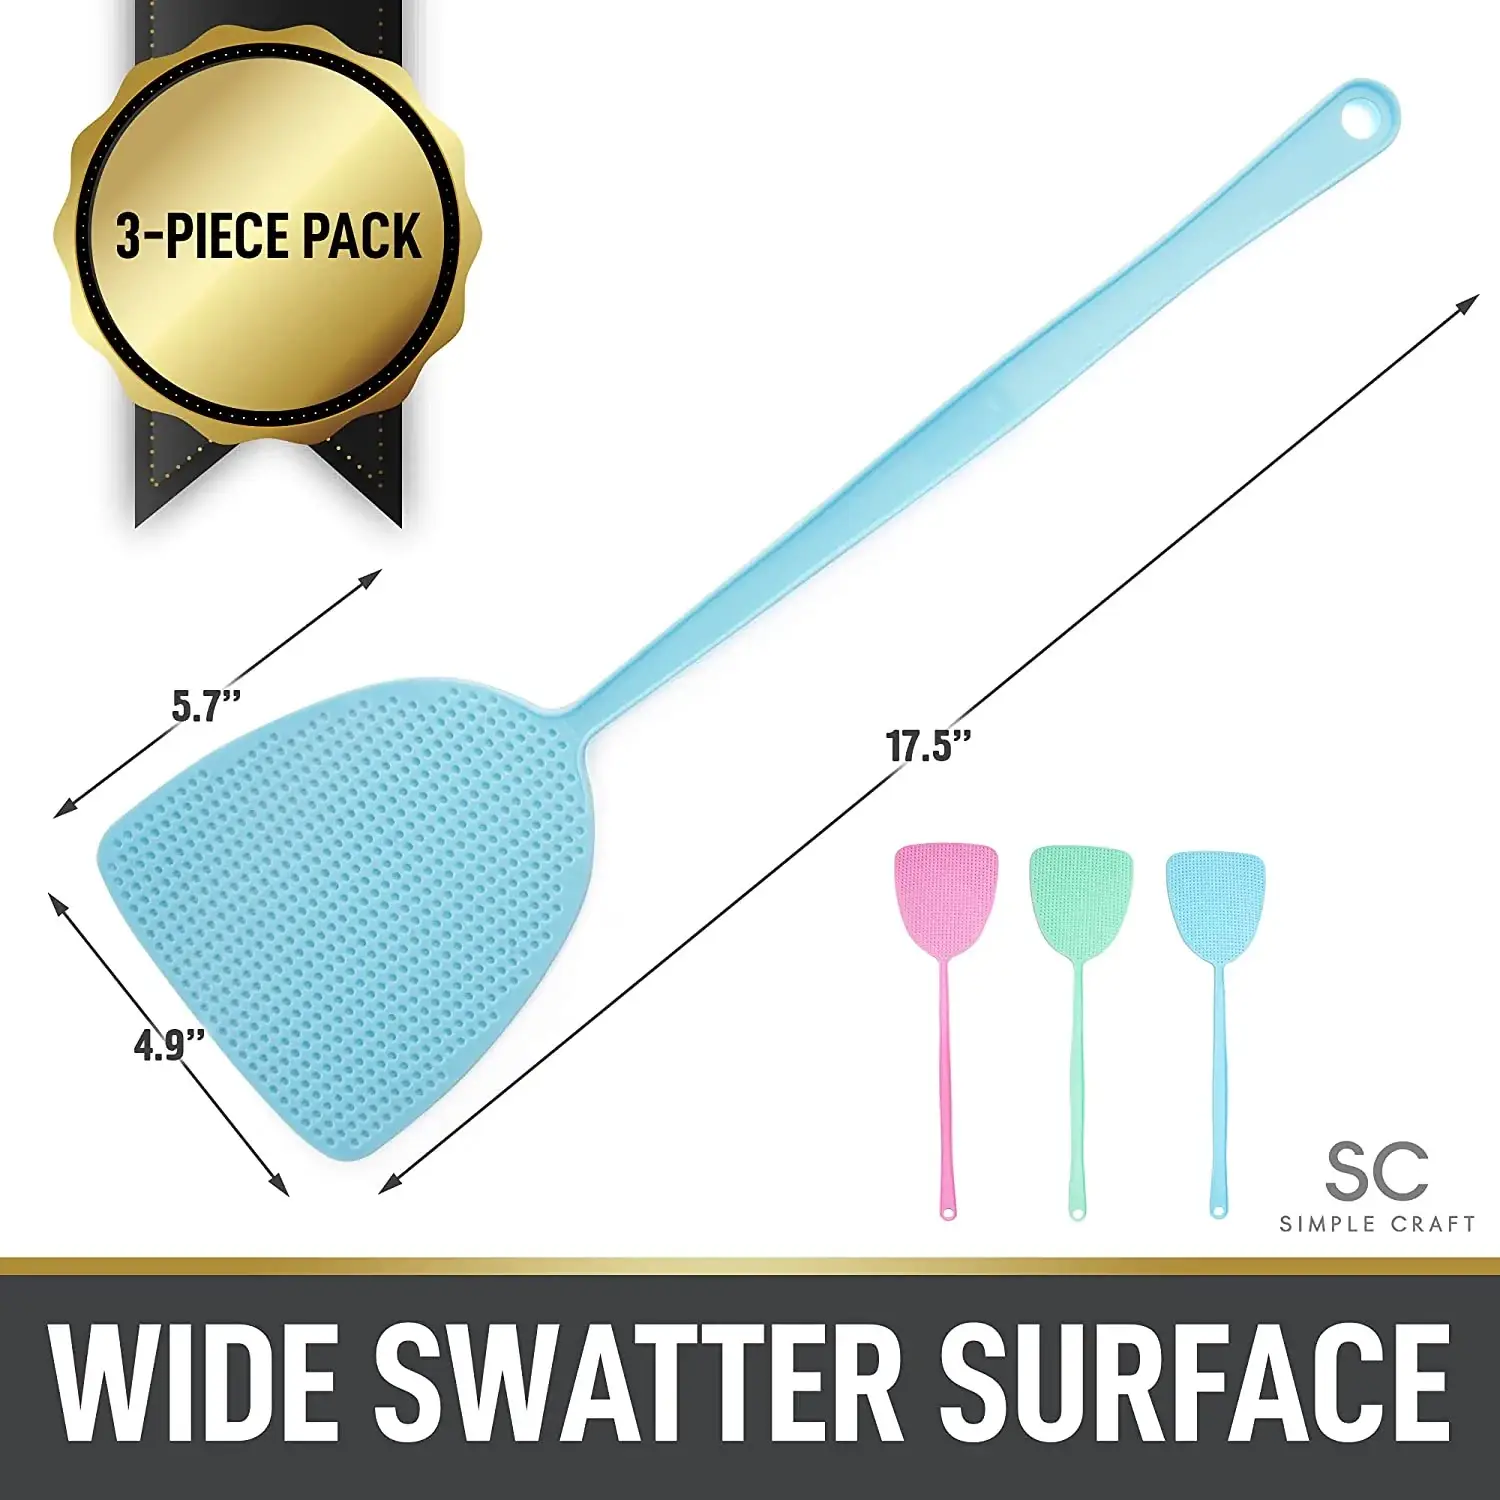 SC Fly Swatter - 3 pack Mulitcolor Plastic